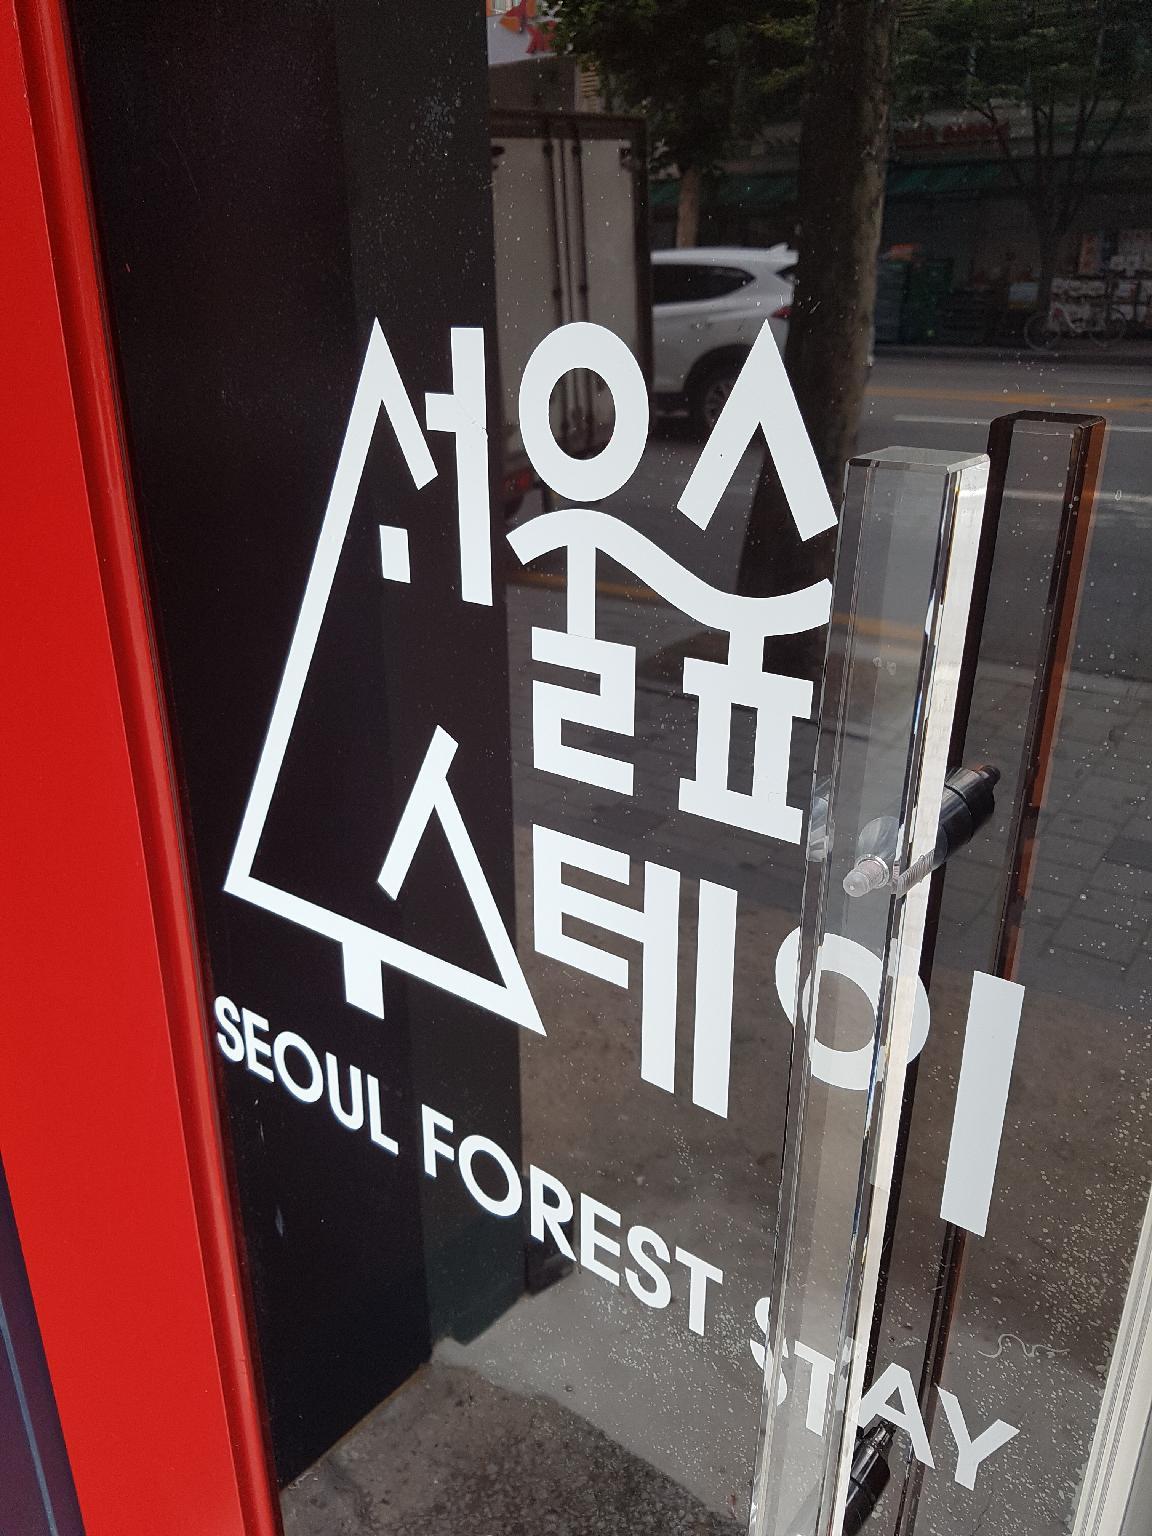 Seoul Forest Stay